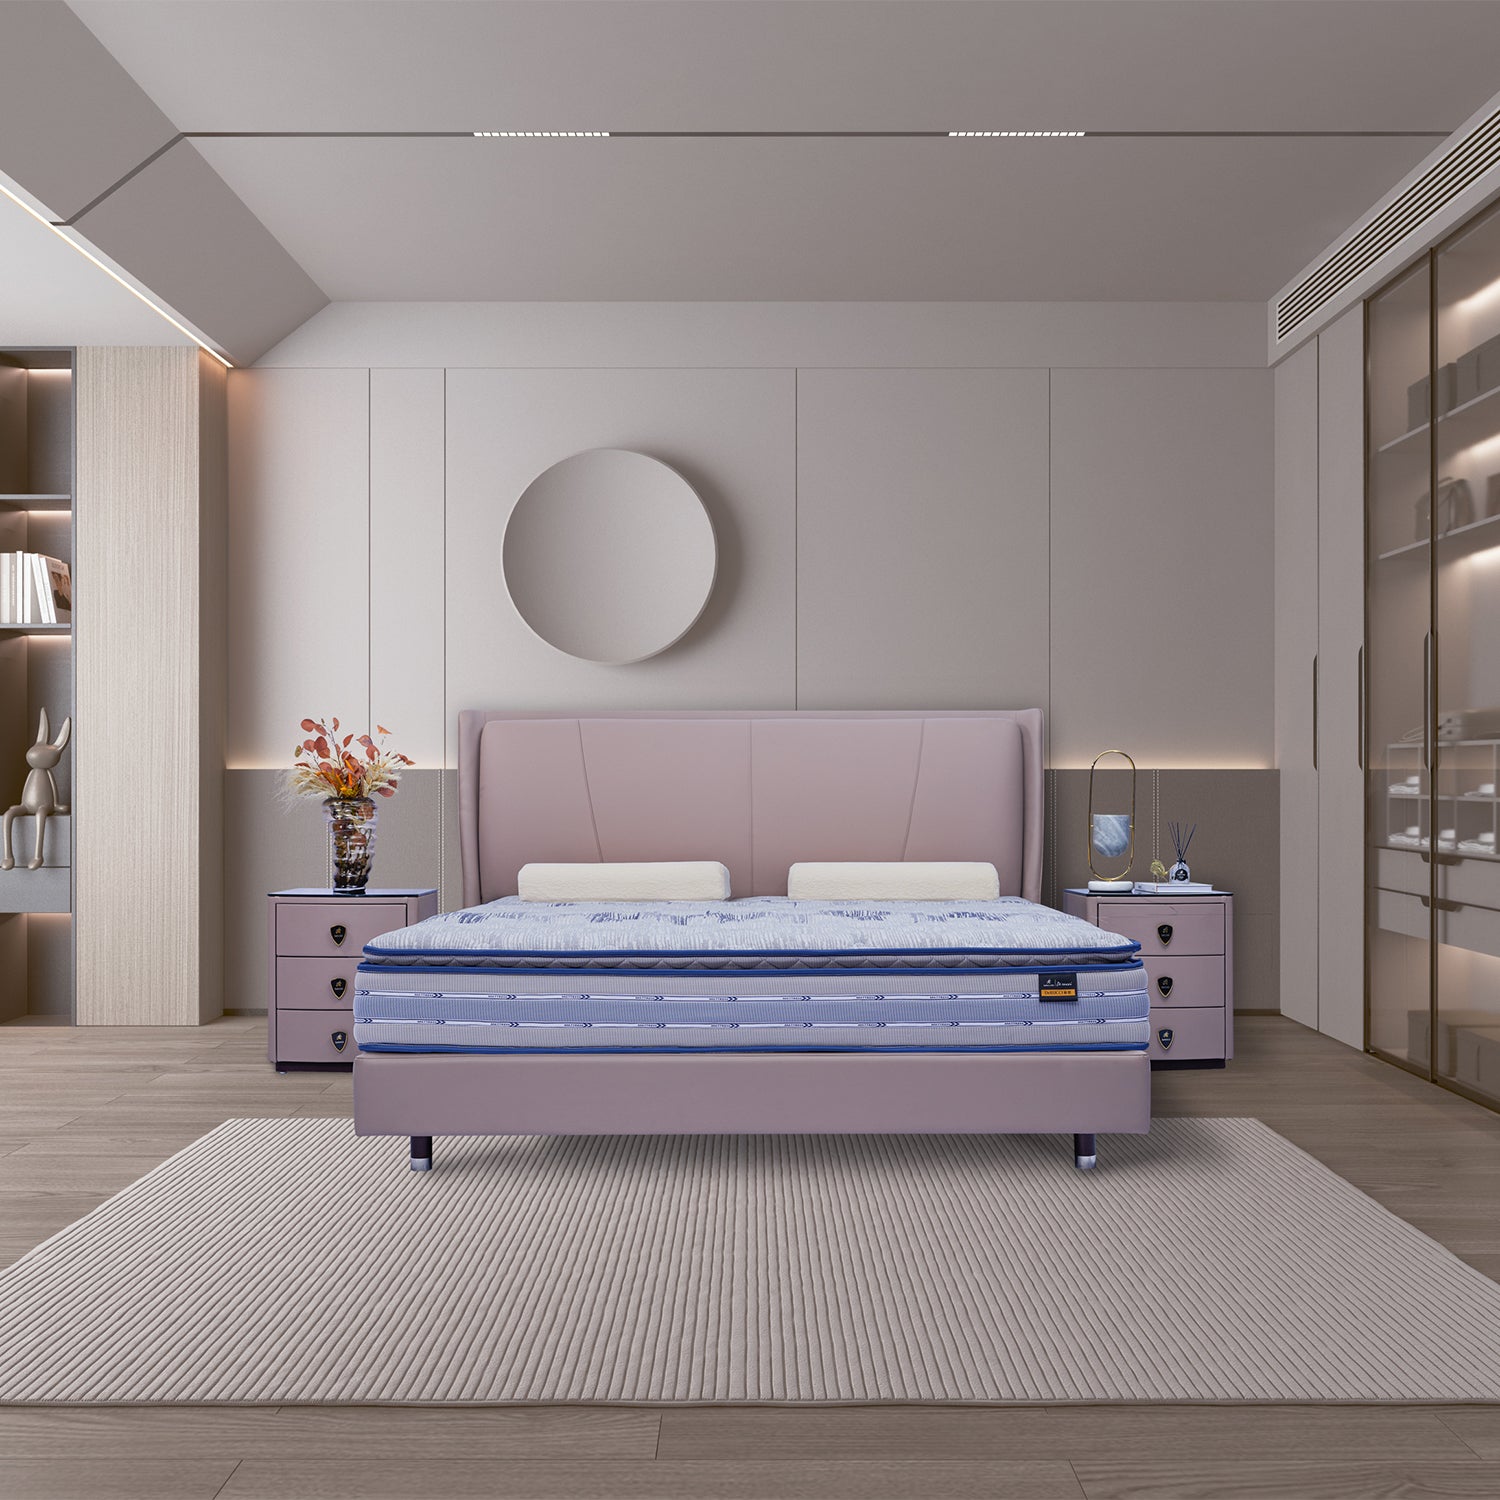 DeRUCCI Bed Frame BOC1 - 018 in a modern bedroom setup with matching nightstands, soft pink upholstered frame, and stylish decor, promoting luxury and comfort.